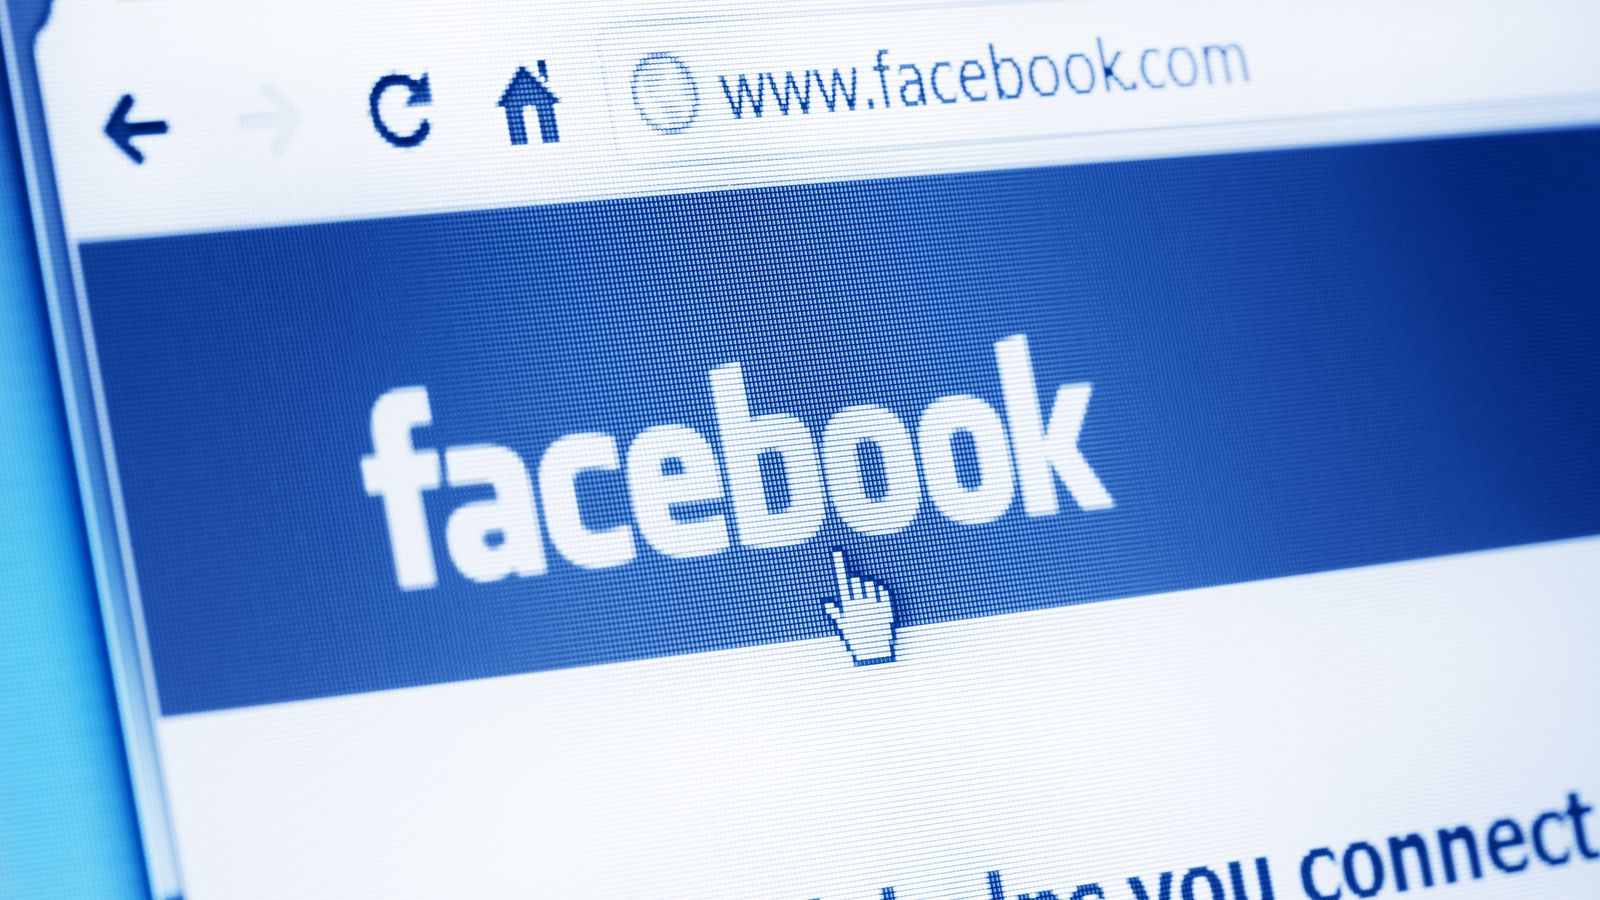 Facebook owner Meta hit with record £1bn fine for breach of EU data regulations